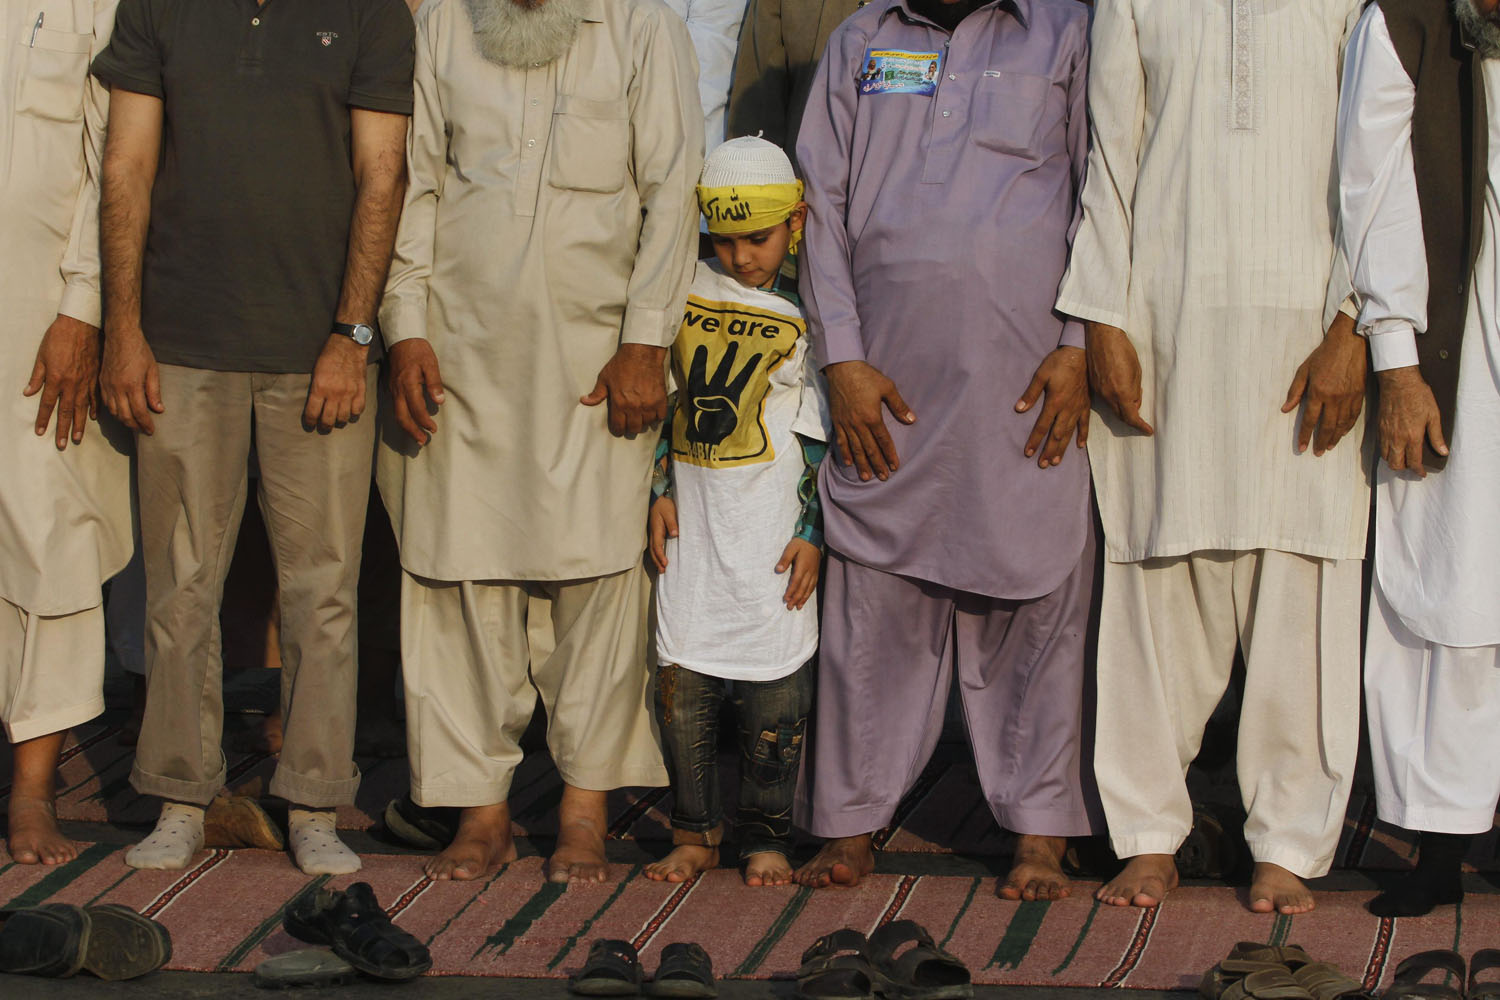 Nov. 24, 2013. A boy stands between supporters of Pakistani religious party Jamaat-e-Islami (JI) and the Pakistan Tehreek-e-Insaf (PTI) political party of former cricket star Imran Khan, as they perform evening prayers during a protest against NATO supply lines in Karachi.